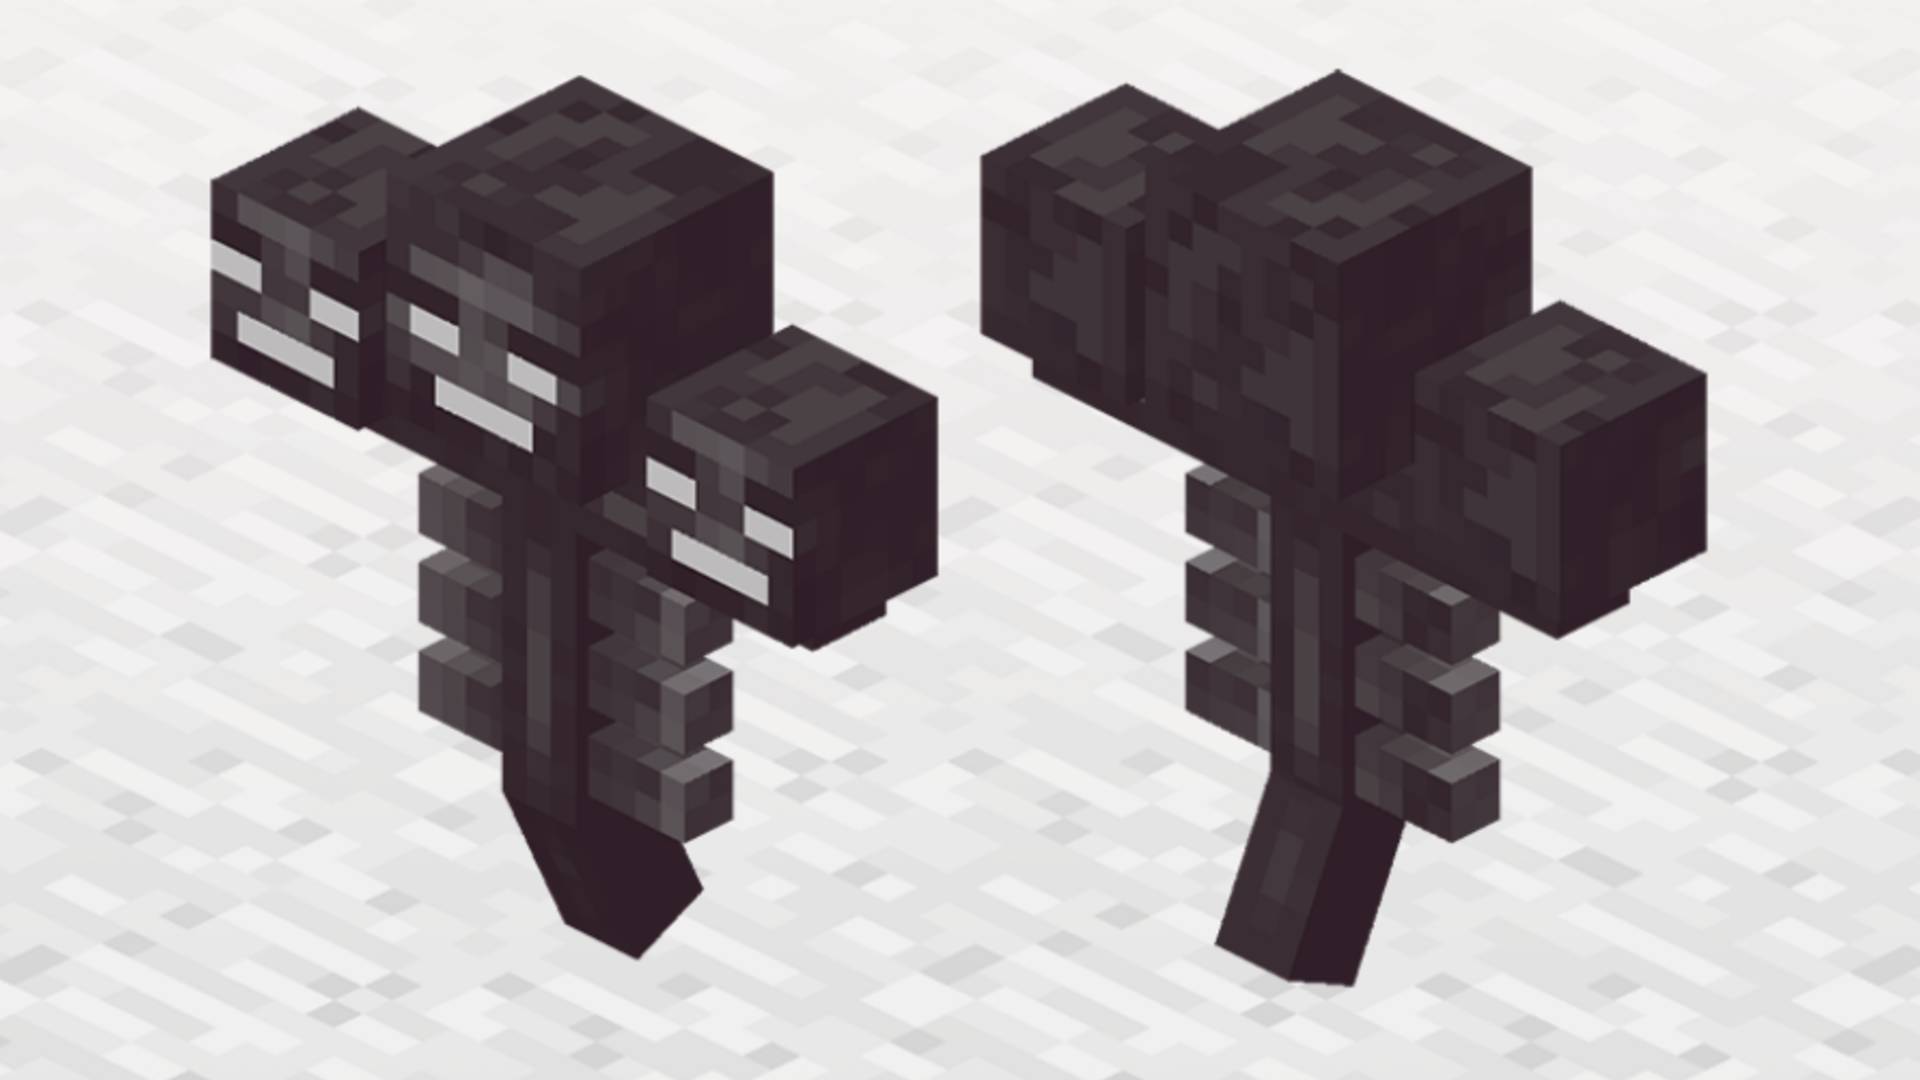 Minecraft wither: the right way to spawn and defeat the wither boss